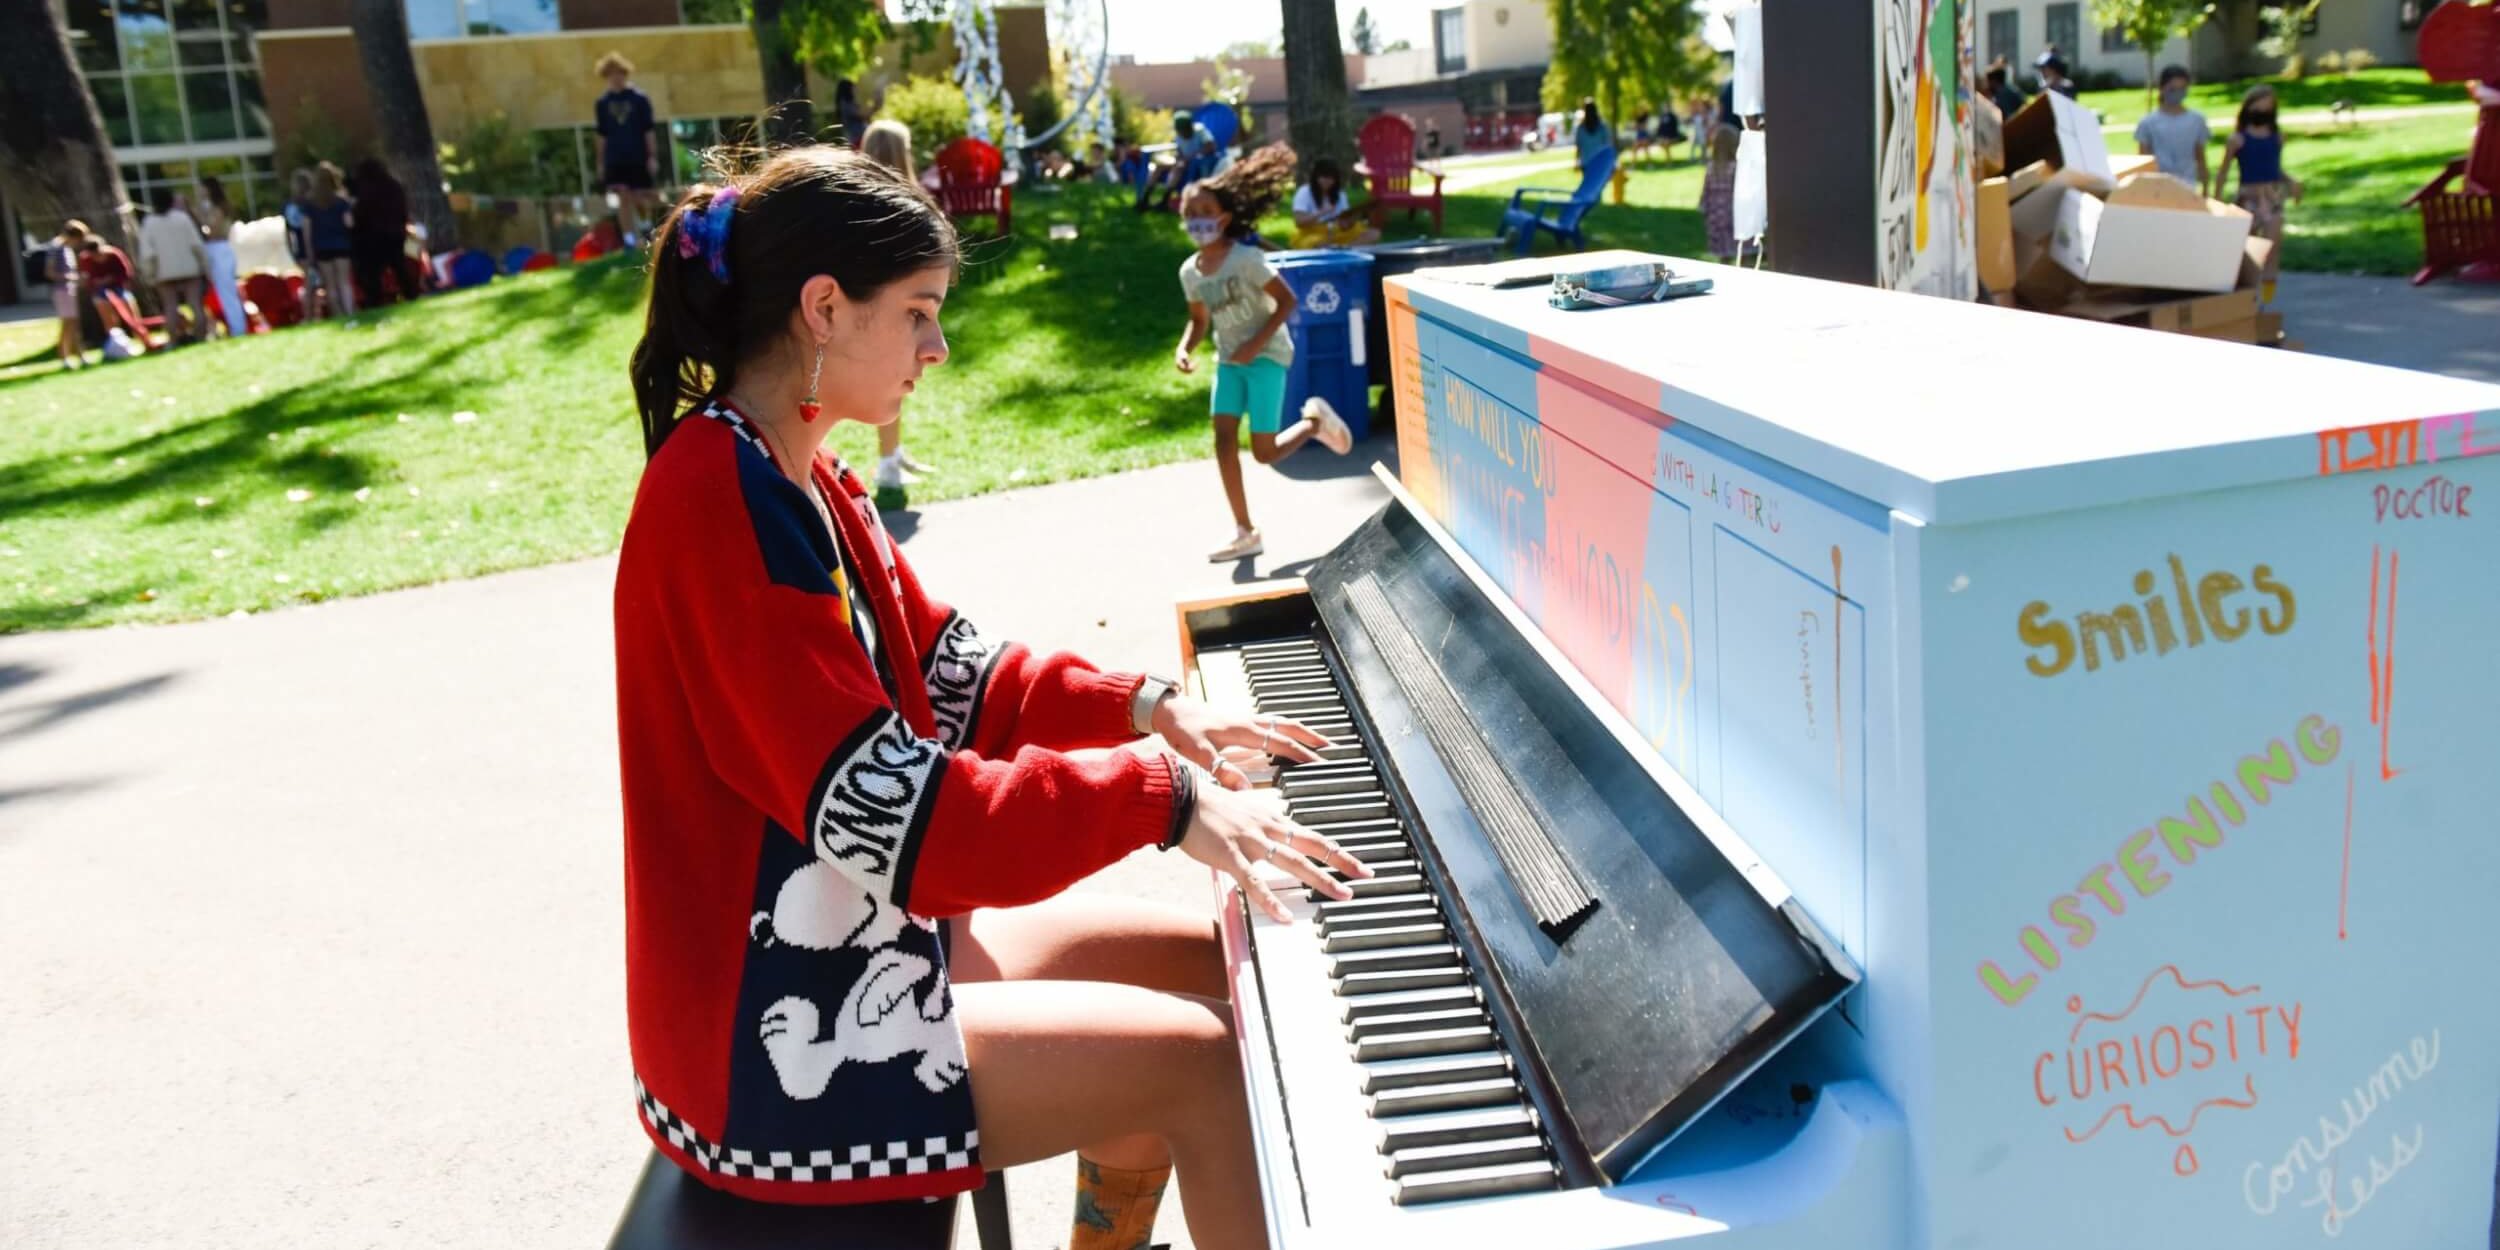 Students played and decorated the piano as part of CA's 2021 The Big Draw art celebration.